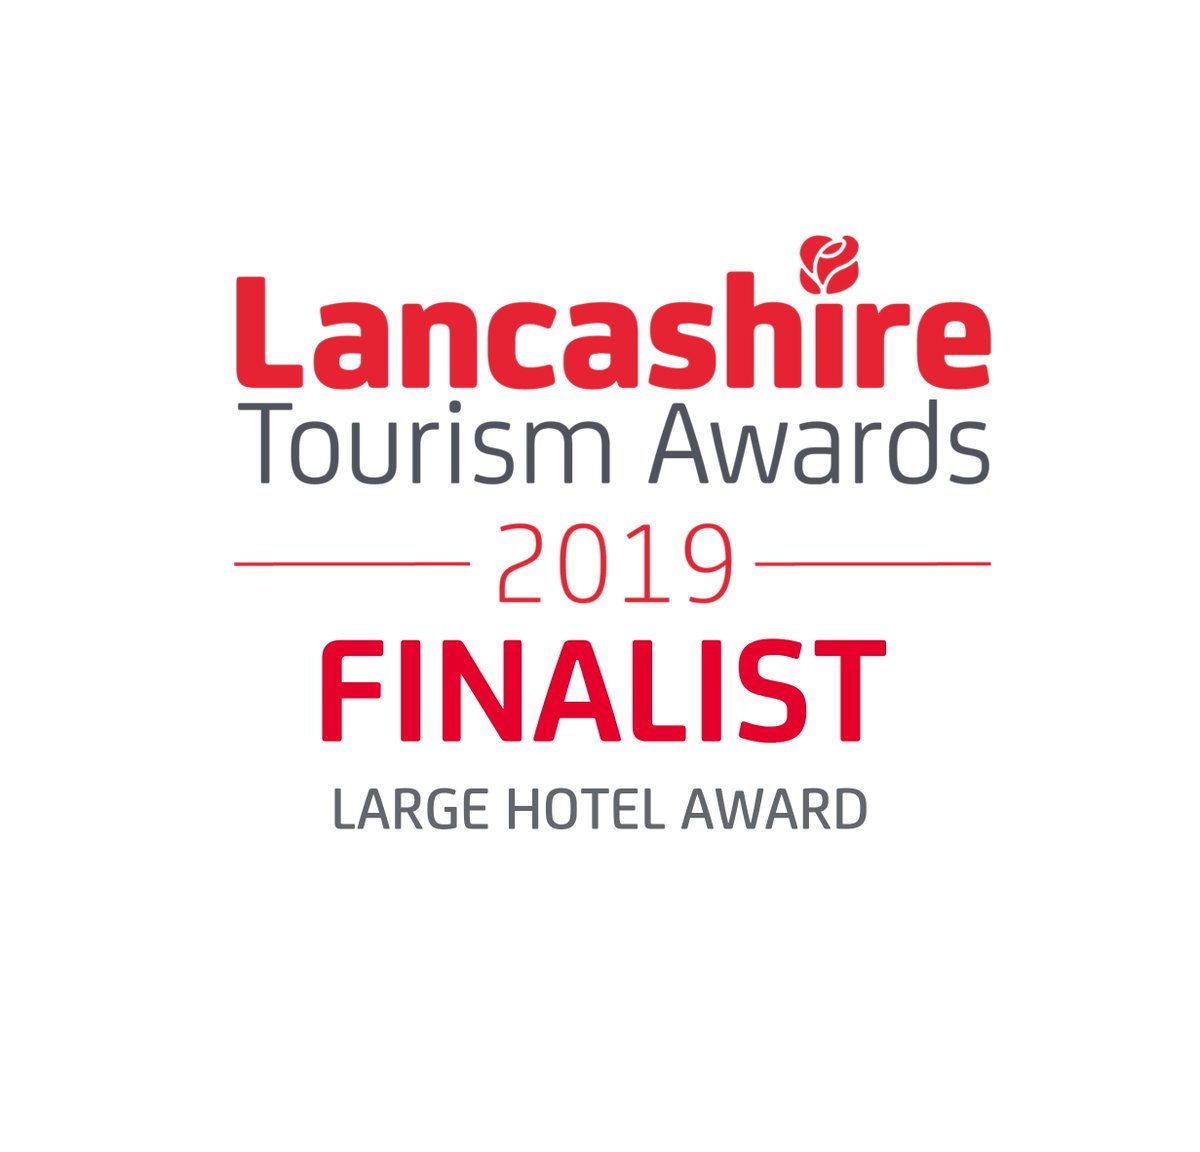 Tonight the Best Western Carlton Blackpool and the Holiday Inn Express Burnley will both be representing Starboard as finalists in the Large Hotel Award category at the 2019 Lancashire Tourism Awards. Congratulations to all the finalists ahead of tonight's ceremony #LTA19